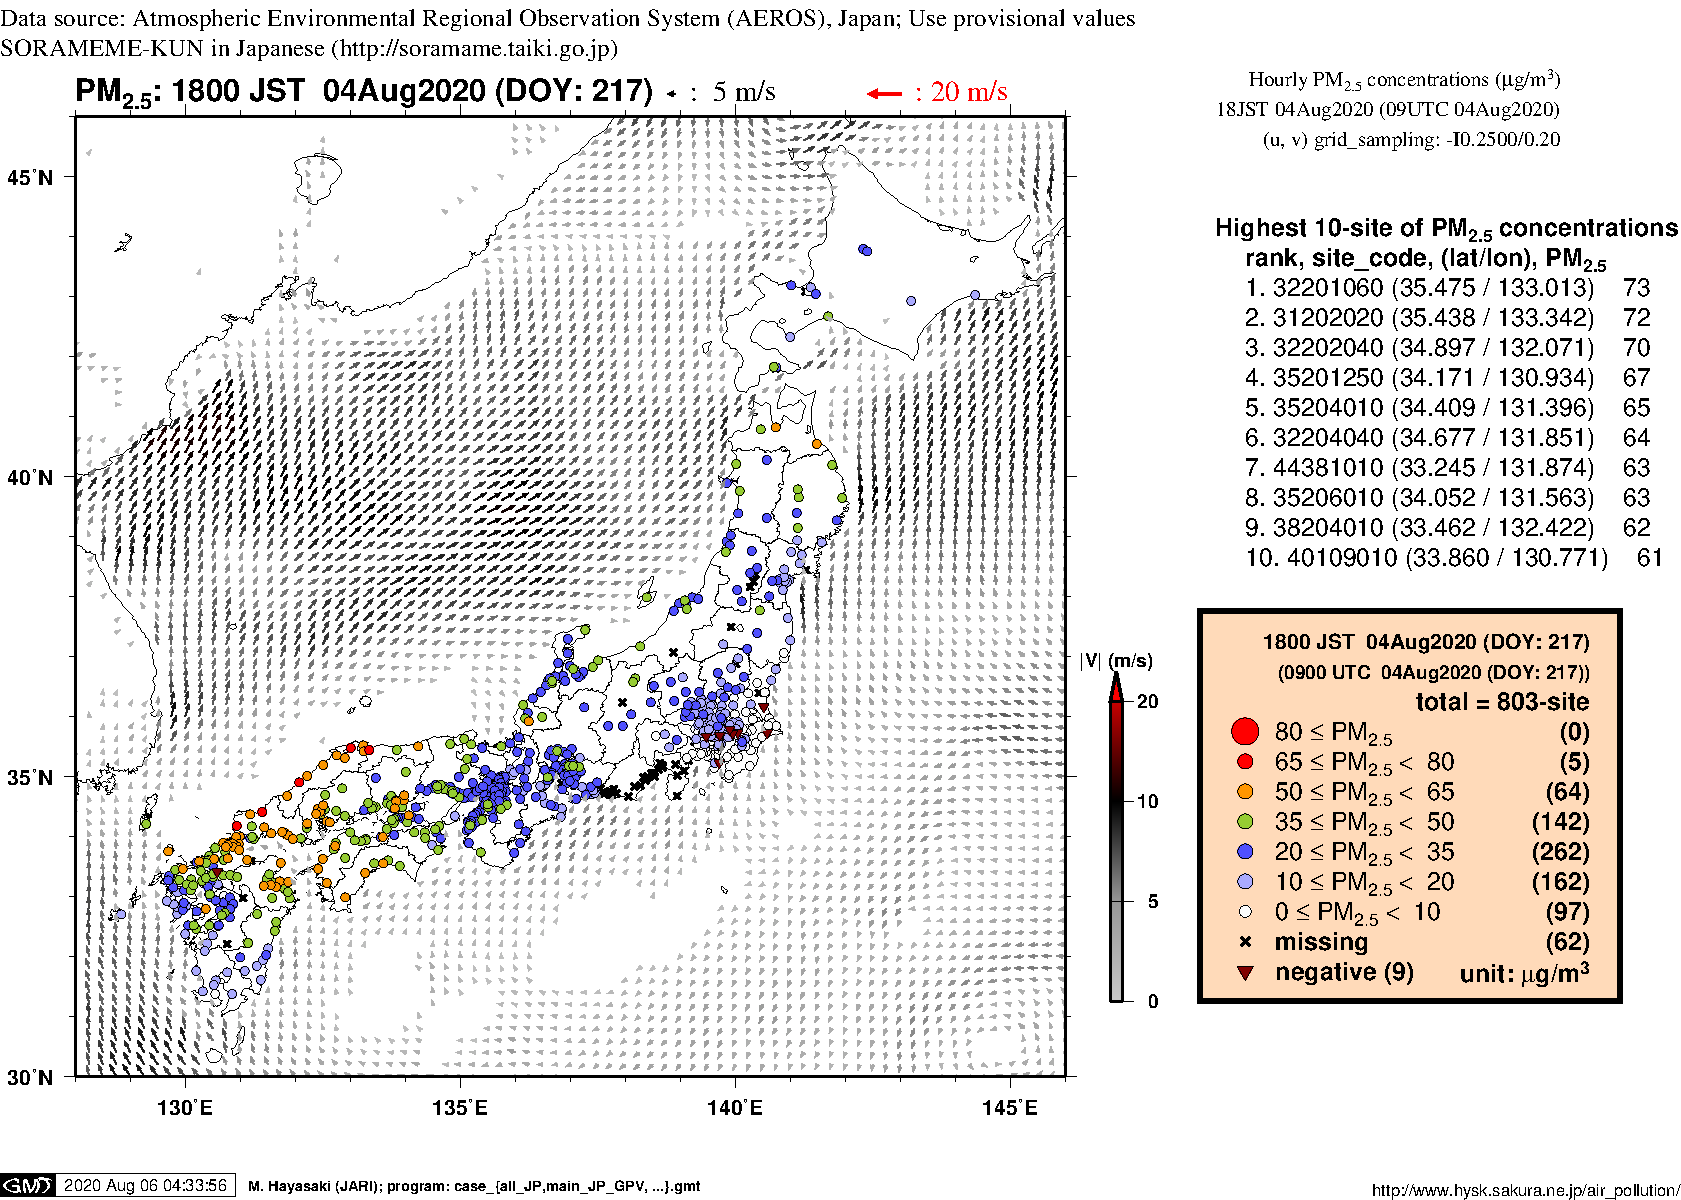 PM2.5 concentration in mainland Japan (18JST 04Aug2020)